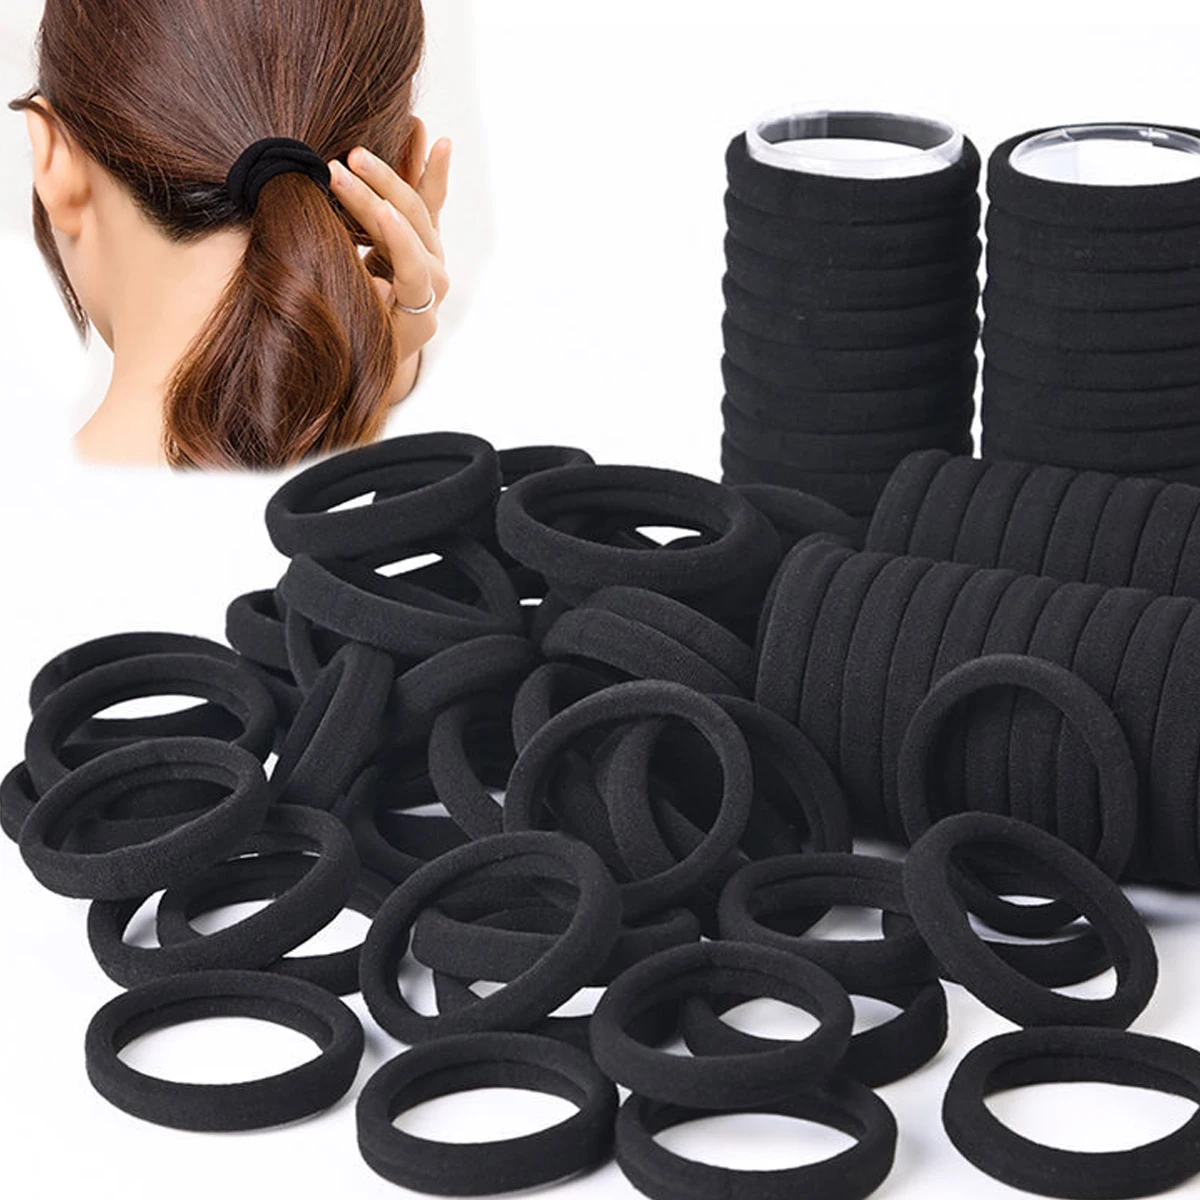 Quality Hair Accessories for Women